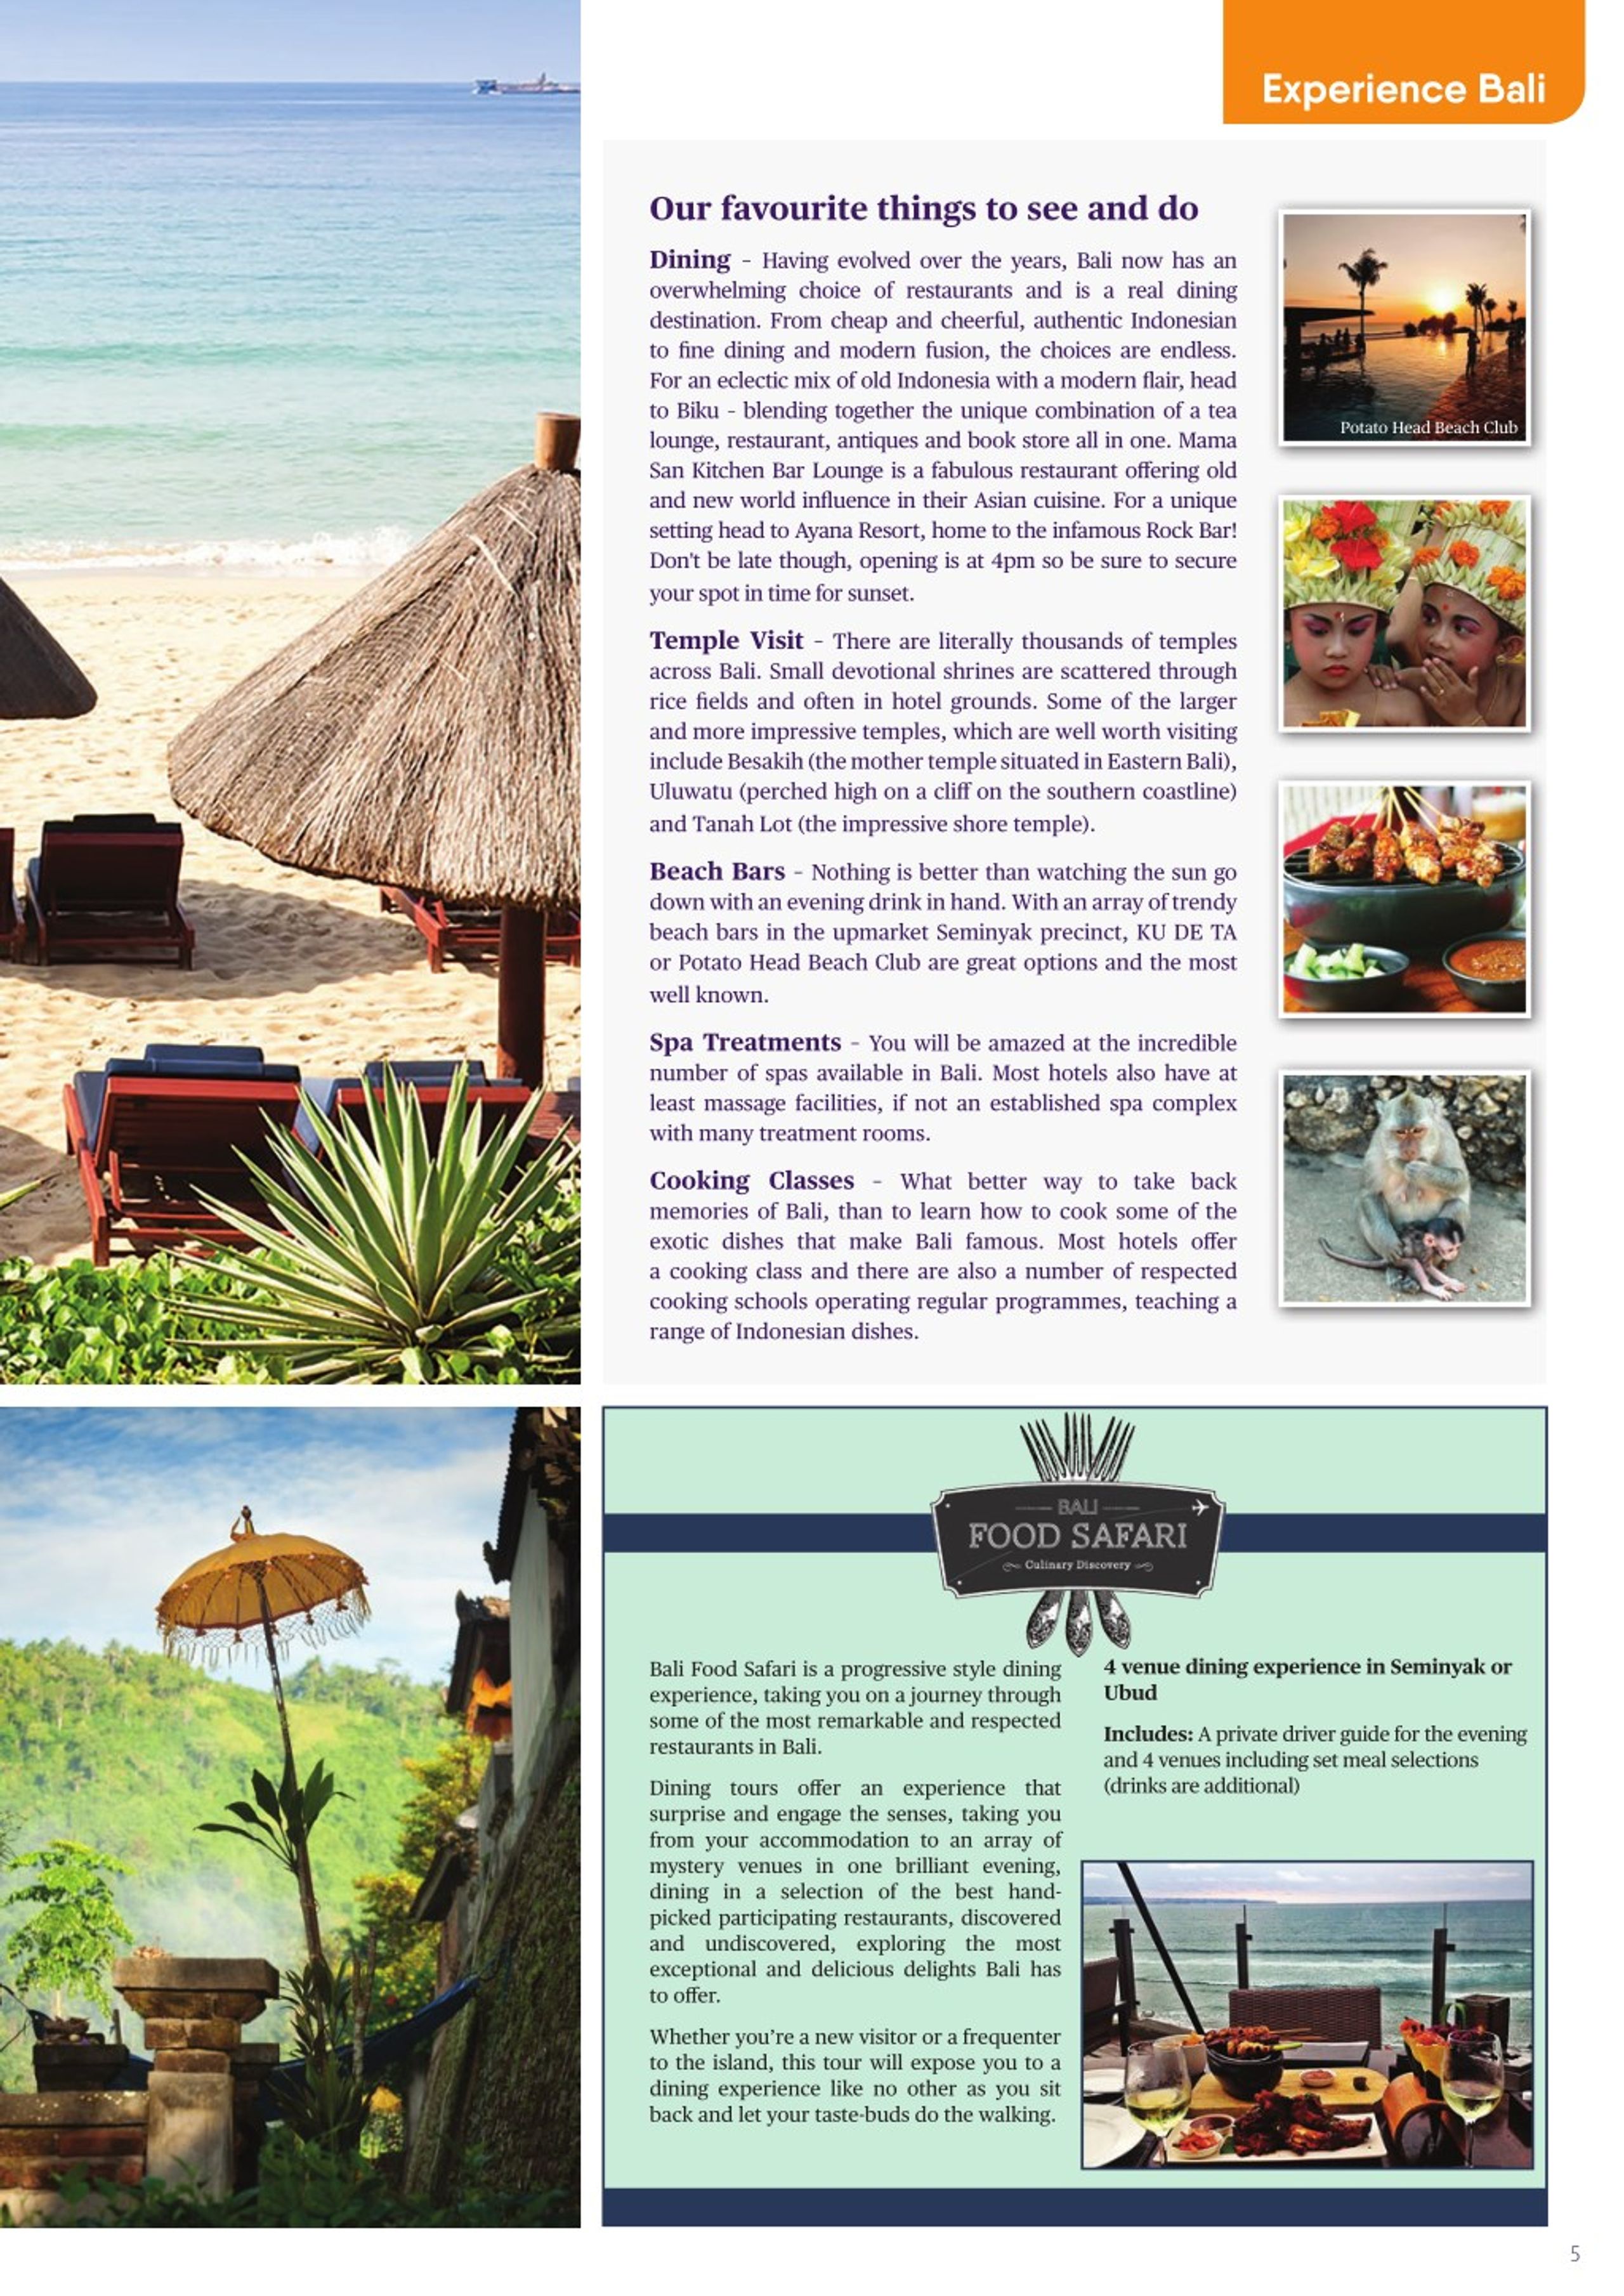 PPT - House of travel - Bali Brochure 2017 PowerPoint Presentation ...